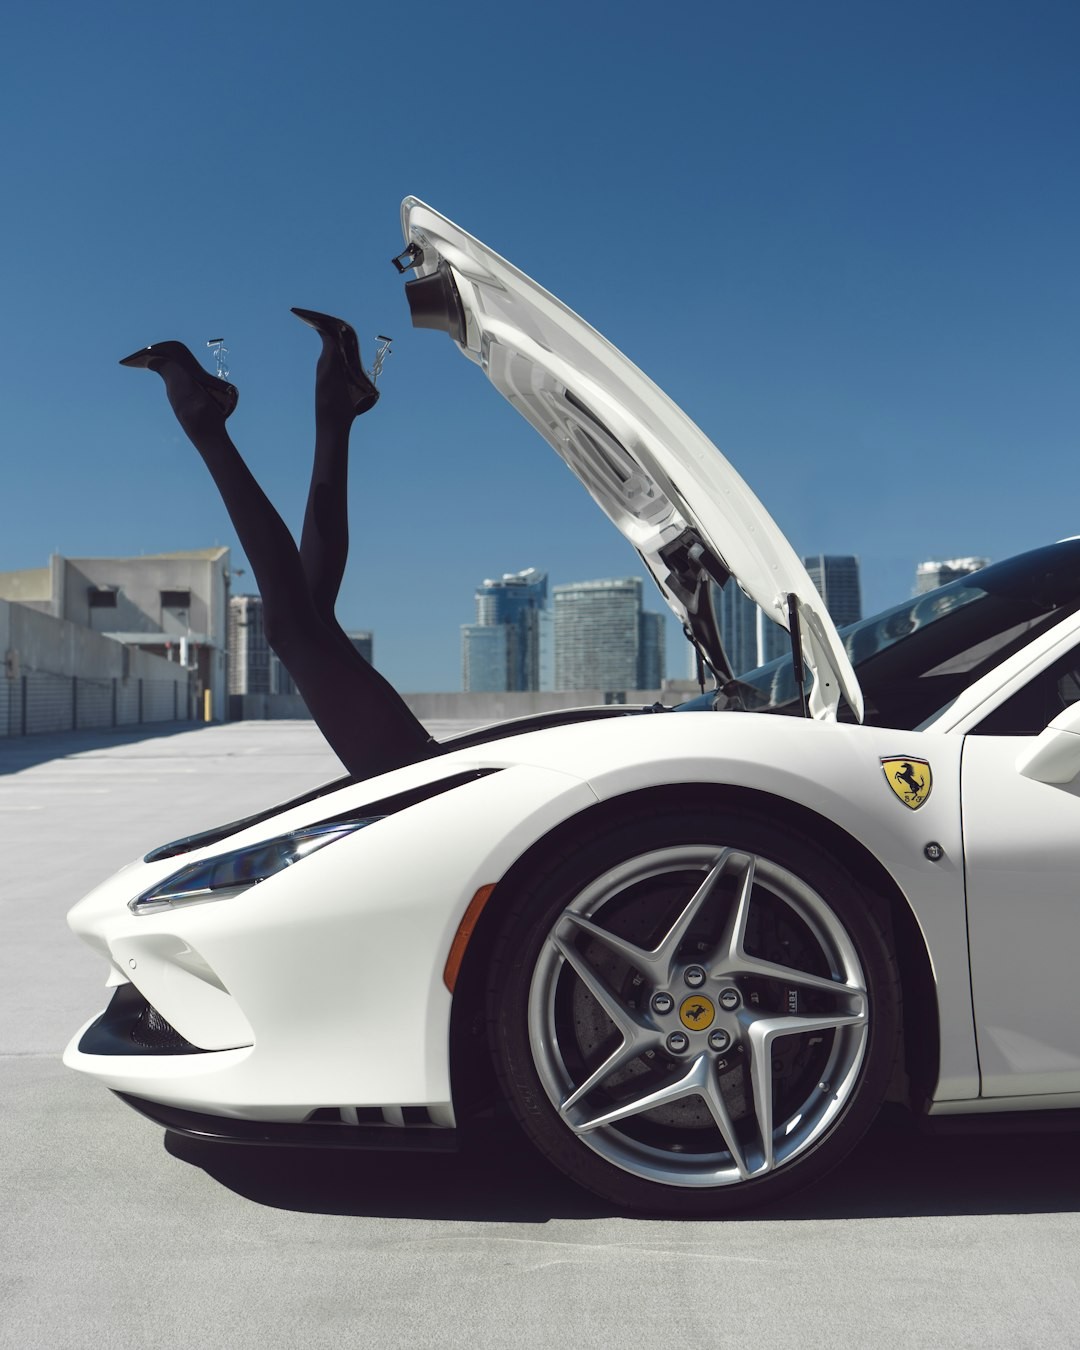 Experience a captivating photo shoot featuring a stunning model and the iconic Ferrari F8 Tributo, provided by Paramount Luxury Rentals. For those looking to rent this extraordinary car or any other exotic vehicles, visit https://www.paramountluxuryrentals.com. Capture moments of luxury, elegance, and power with the perfect blend of beauty and automotive excellence. Reserve your unforgettable experience today.